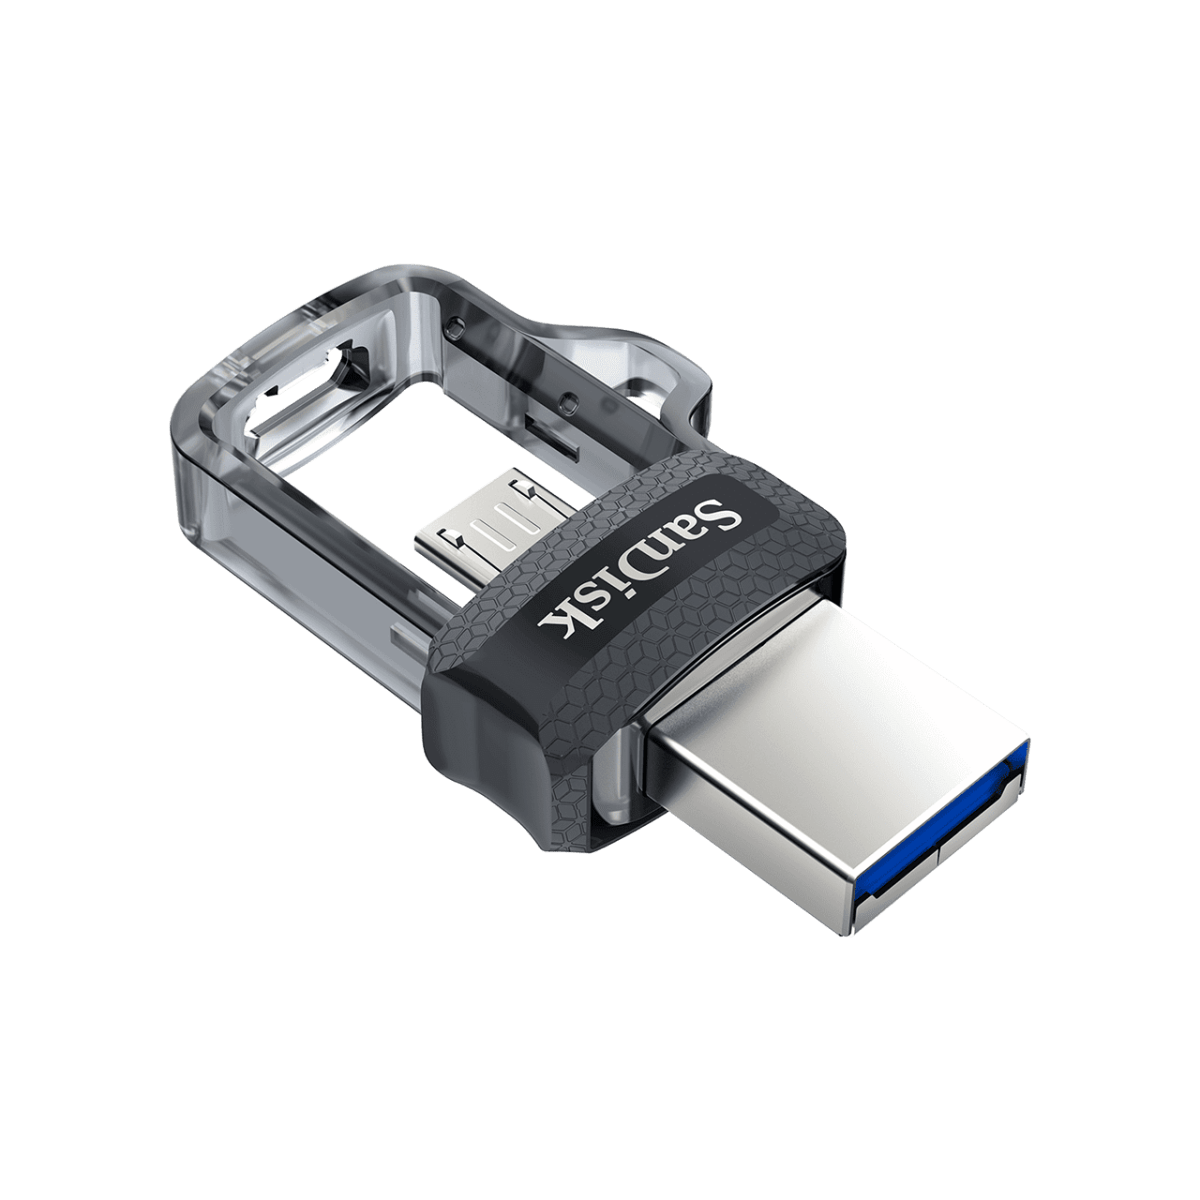 Ultra Dual Drive Usb M 3 Open Angled.png.thumb .1280.1280 Sandisk &Lt;Div Class=&Quot;Active&Quot; Data-Sku=&Quot;Sddd3-016G-A46&Quot;&Gt; &Lt;H1&Gt;Instantly Free Up Space On Your Android Smartphone&Lt;/H1&Gt; &Lt;Div Class=&Quot;Inheritpara Mb-4&Quot;&Gt; The Sandisk Ultra® Dual Drive M3.0 Makes It Easy To Transfer Content From Your Phone To Your Computer. With A Micro-Usb Connector On One End And A Usb 3.0 Connector On The Other, The Drive Lets You Move Content Easily Between Your Devices—From Your Android™ Smartphone Or Tablet To Your Laptop, Pc Or Mac Computer&Lt;A Class=&Quot;Disclosure&Quot; Tabindex=&Quot;0&Quot; Href=&Quot;Https://Shop.westerndigital.com/Products/Usb-Flash-Drives/Sandisk-Ultra-Dual-Drive-M30-Usb-3-0-Micro-Usb#Disclosures&Quot; Target=&Quot;_Self&Quot; Rel=&Quot;Noopener Noreferrer&Quot; Aria-Labelledby=&Quot;Disclosures&Quot;&Gt;&Lt;Sup&Gt;1&Lt;/Sup&Gt;&Lt;/A&Gt;. The Usb 3.0 Connector Is High-Performance And Backward-Compatible With Usb 2.0 Ports. The Sandisk® Memory Zone App&Lt;A Class=&Quot;Disclosure&Quot; Tabindex=&Quot;0&Quot; Href=&Quot;Https://Shop.westerndigital.com/Products/Usb-Flash-Drives/Sandisk-Ultra-Dual-Drive-M30-Usb-3-0-Micro-Usb#Disclosures&Quot; Target=&Quot;_Self&Quot; Rel=&Quot;Noopener Noreferrer&Quot; Aria-Labelledby=&Quot;Disclosures&Quot;&Gt;&Lt;Sup&Gt;2&Lt;/Sup&Gt;&Lt;/A&Gt; For Android (Available On Google Play) Helps You Manage Your Device’s Memory And Your Content. &Lt;Strong&Gt;Warranty&Lt;/Strong&Gt; The Sandisk Ultra Flair Usb 3.0 Flash Drive Is Backed By A Five-Year Manufacturer Warranty&Lt;A Class=&Quot;Disclosure&Quot; Tabindex=&Quot;0&Quot; Href=&Quot;Https://Shop.westerndigital.com/Products/Usb-Flash-Drives/Sandisk-Ultra-Flair-Usb-3-0#Disclosures&Quot; Target=&Quot;_Self&Quot; Rel=&Quot;Noopener Noreferrer&Quot; Aria-Labelledby=&Quot;Disclosures&Quot;&Gt;&Lt;Sup&Gt;2&Lt;/Sup&Gt;&Lt;/A&Gt; &Lt;/Div&Gt; &Lt;/Div&Gt; Sandisk Ultra Dual Drive M3.0 Flash Drive For Android Smartphones (128Gb)